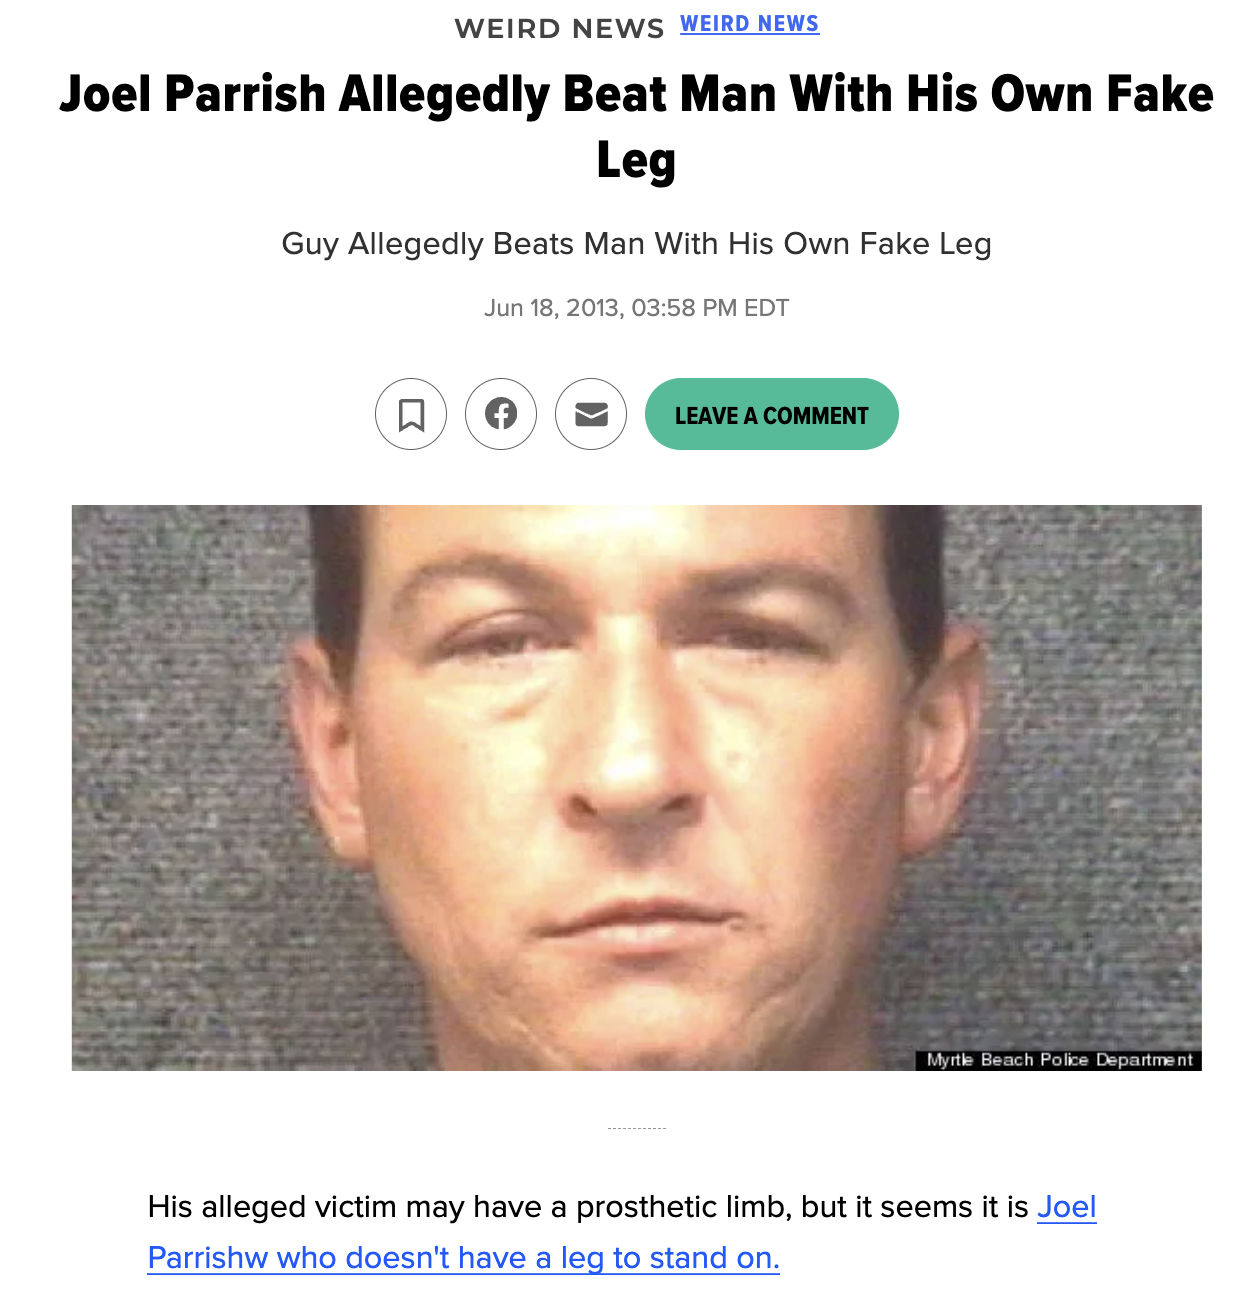 photo caption - Weird News Weird News Joel Parrish Allegedly Beat Man With His Own Fake Leg Guy Allegedly Beats Man With His Own Fake Leg , Edt Leave A Comment Myrtle Beach Police Department His alleged victim may have a prosthetic limb, but it seems it i